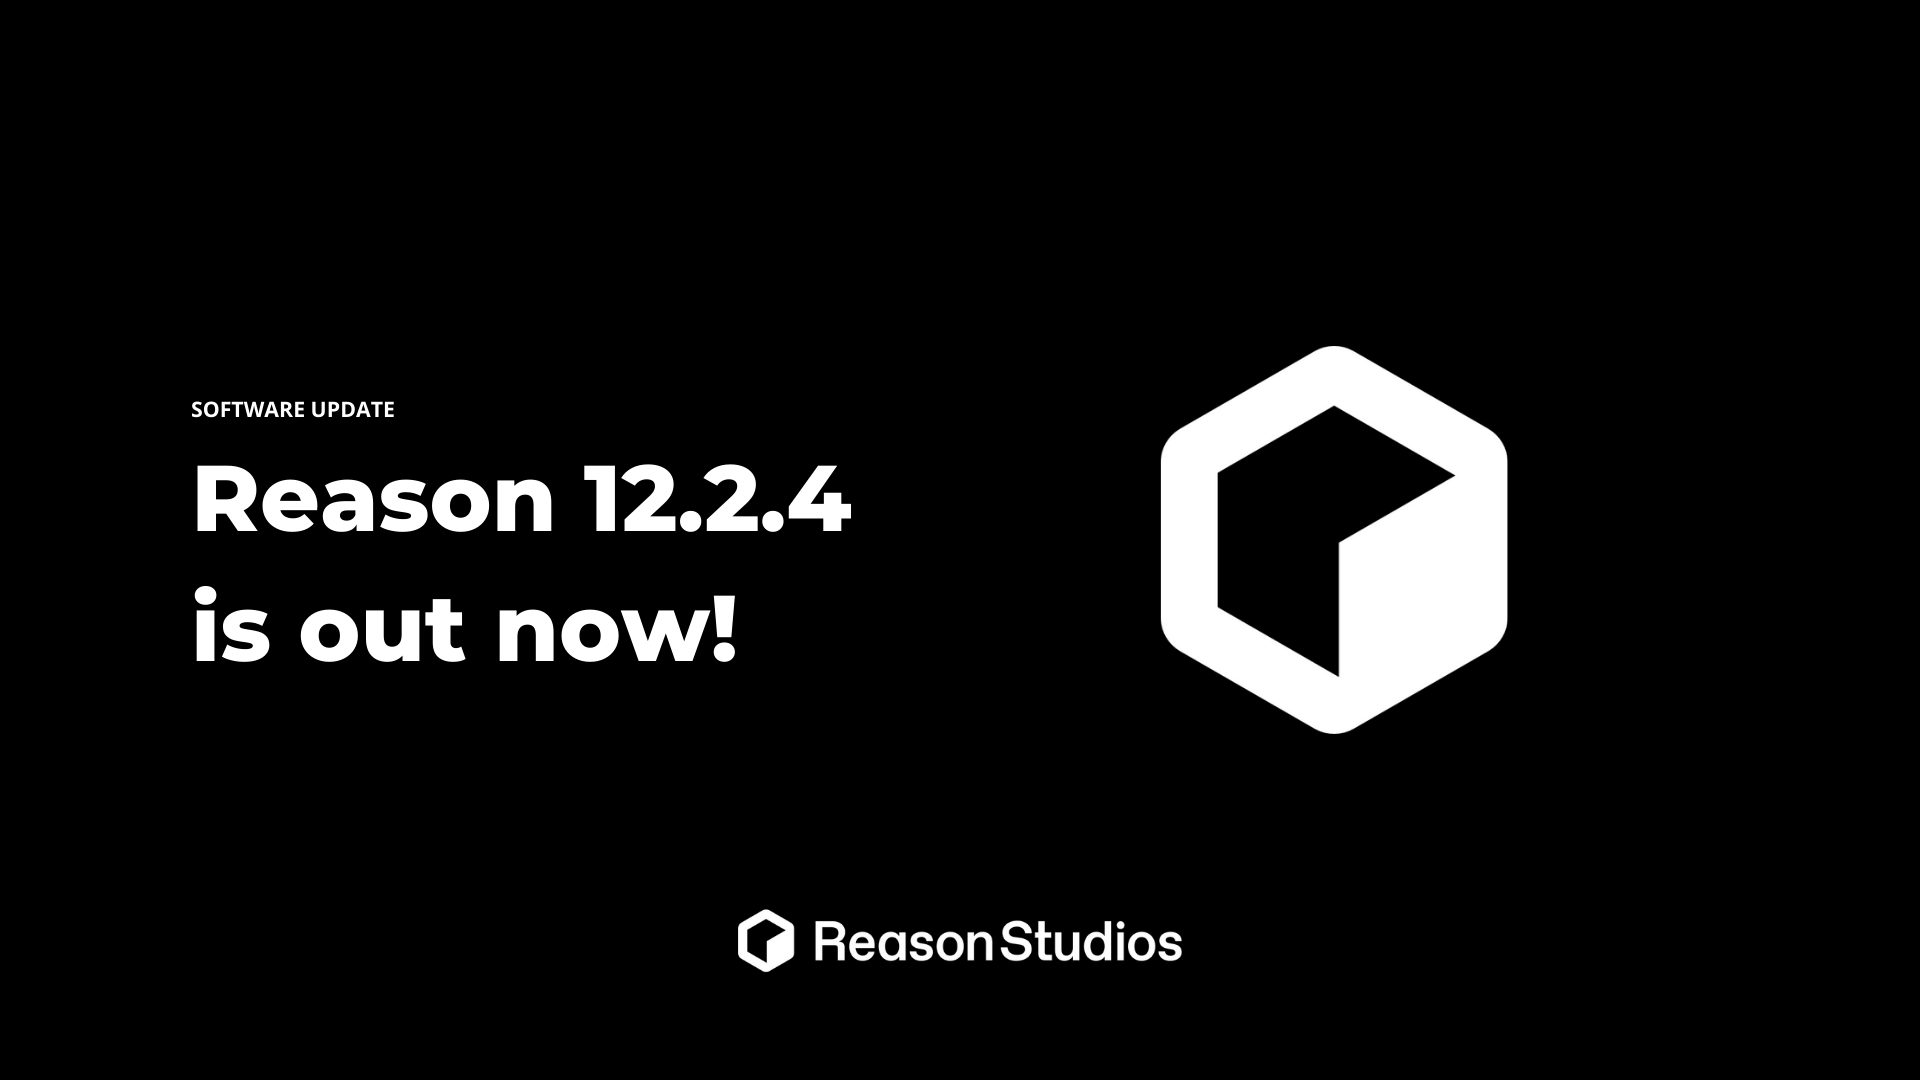 Reason 12.2.4 is out now